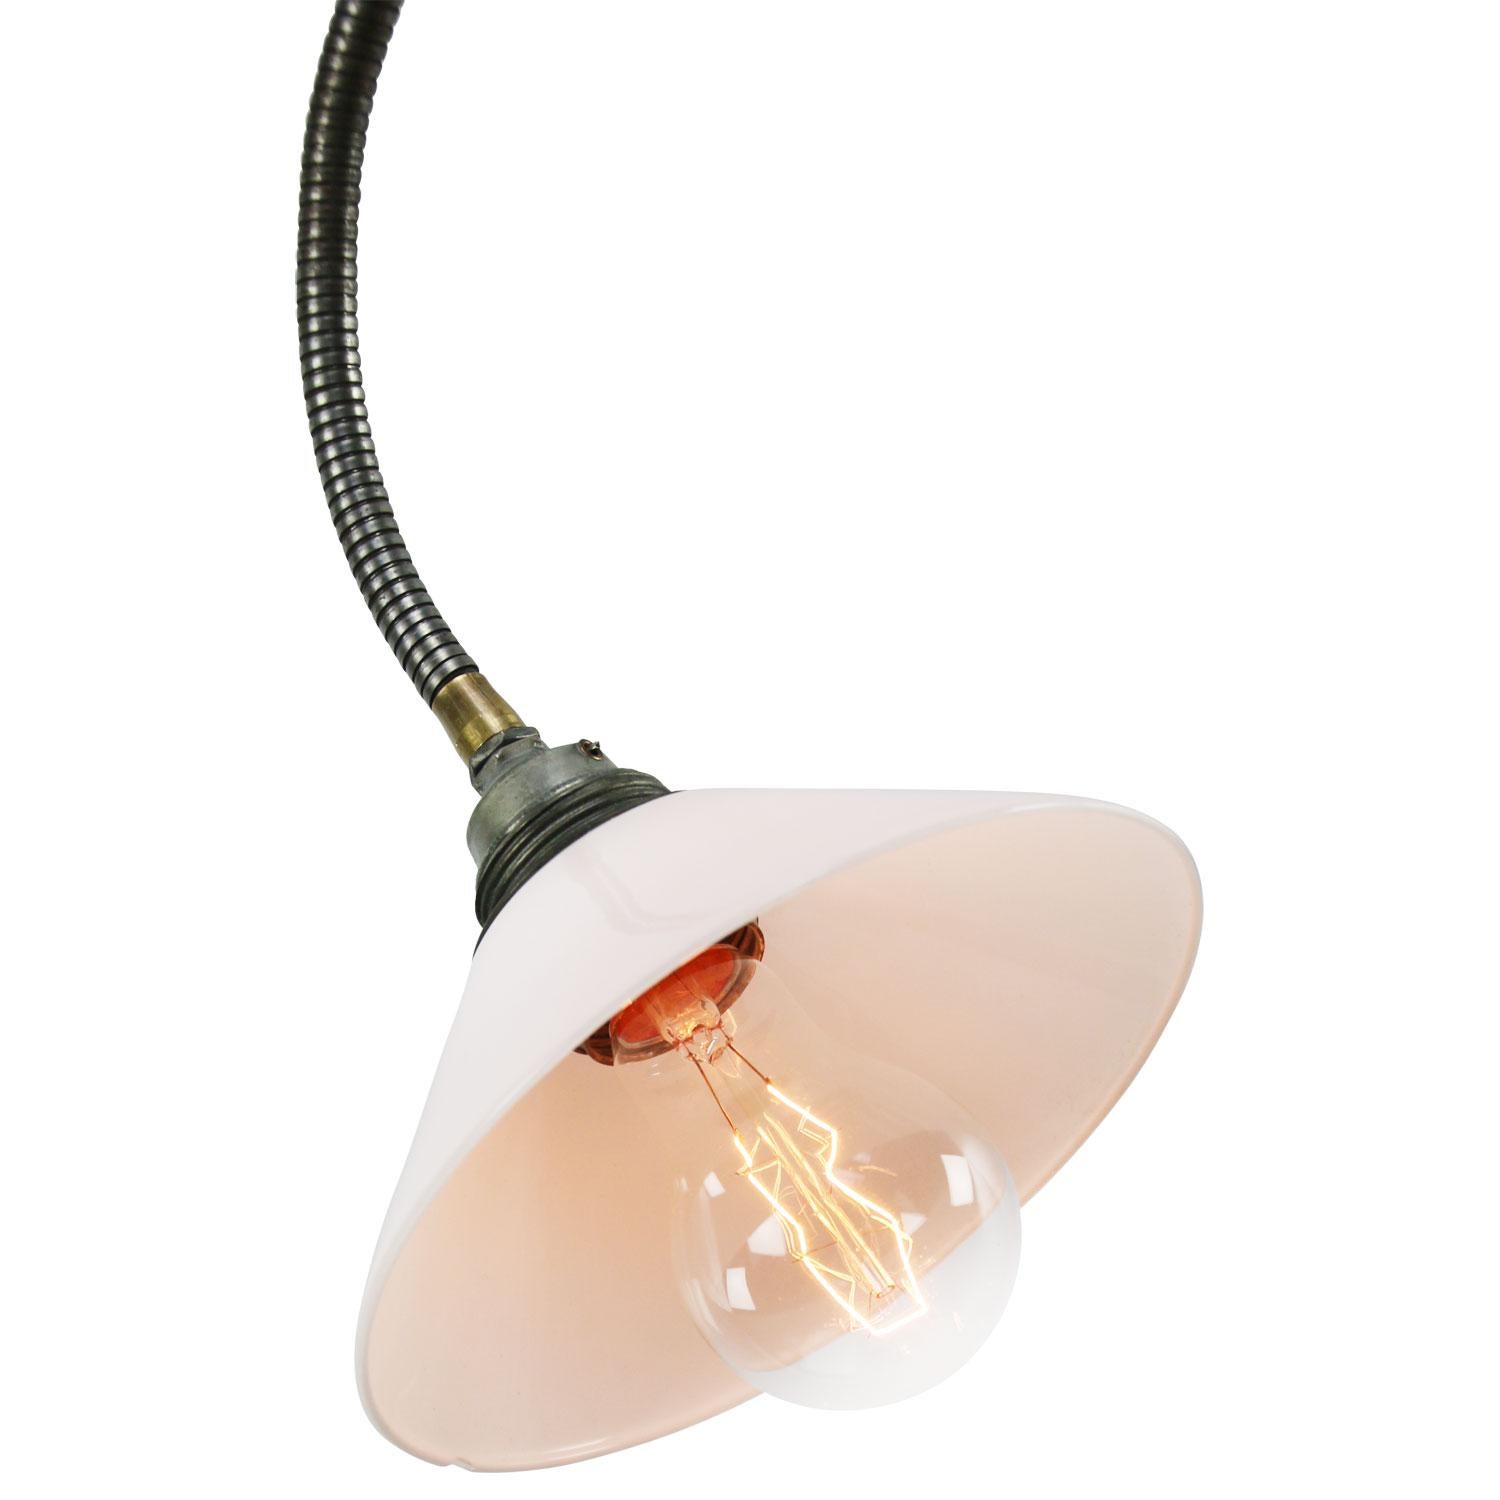 Wall light spot.
White Opaline glass shade.
Gooseneck arm
Adjustable in height and angle.

Diameter cast iron wall mount 10.5 cm / 4”

Weight: 1.40 kg / 3.1 lb

Priced per individual item. All lamps have been made suitable by international standards